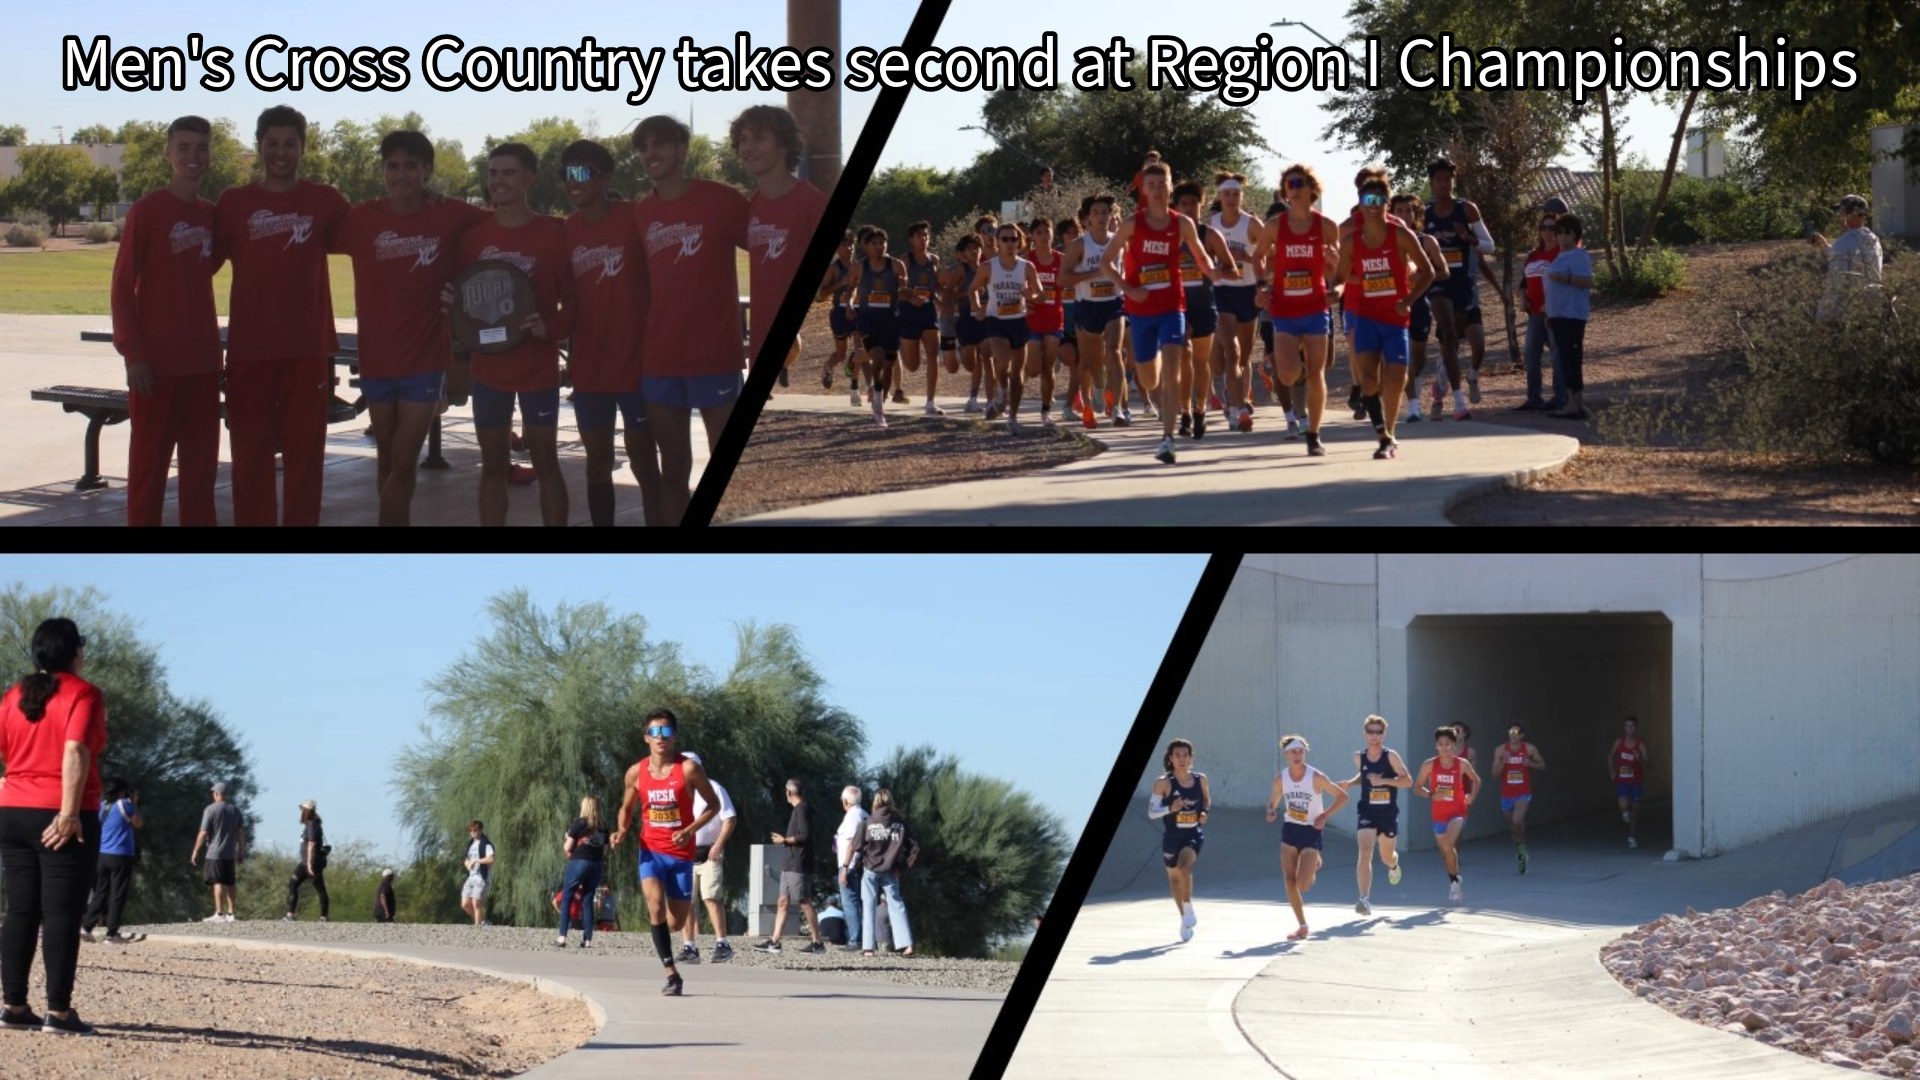 Men's Cross Country takes second at Region I Championships